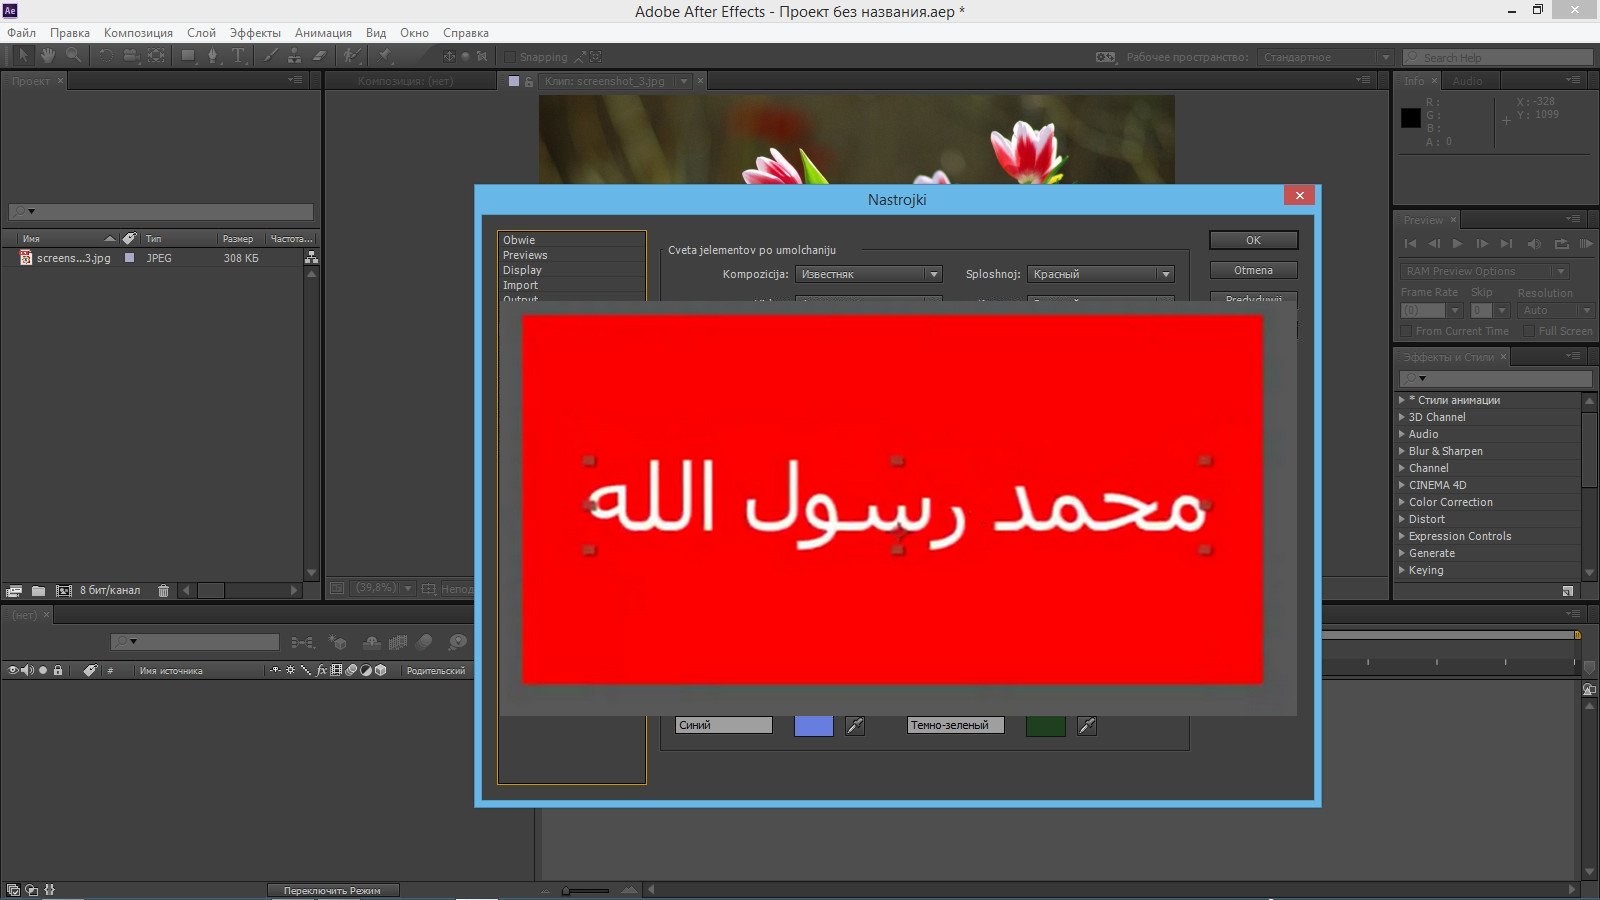 After effect ключи. Проекты Афтер эффект. Adobe after Effects эффекты. Проекты after Effects. Анимация в Афтер эффект.